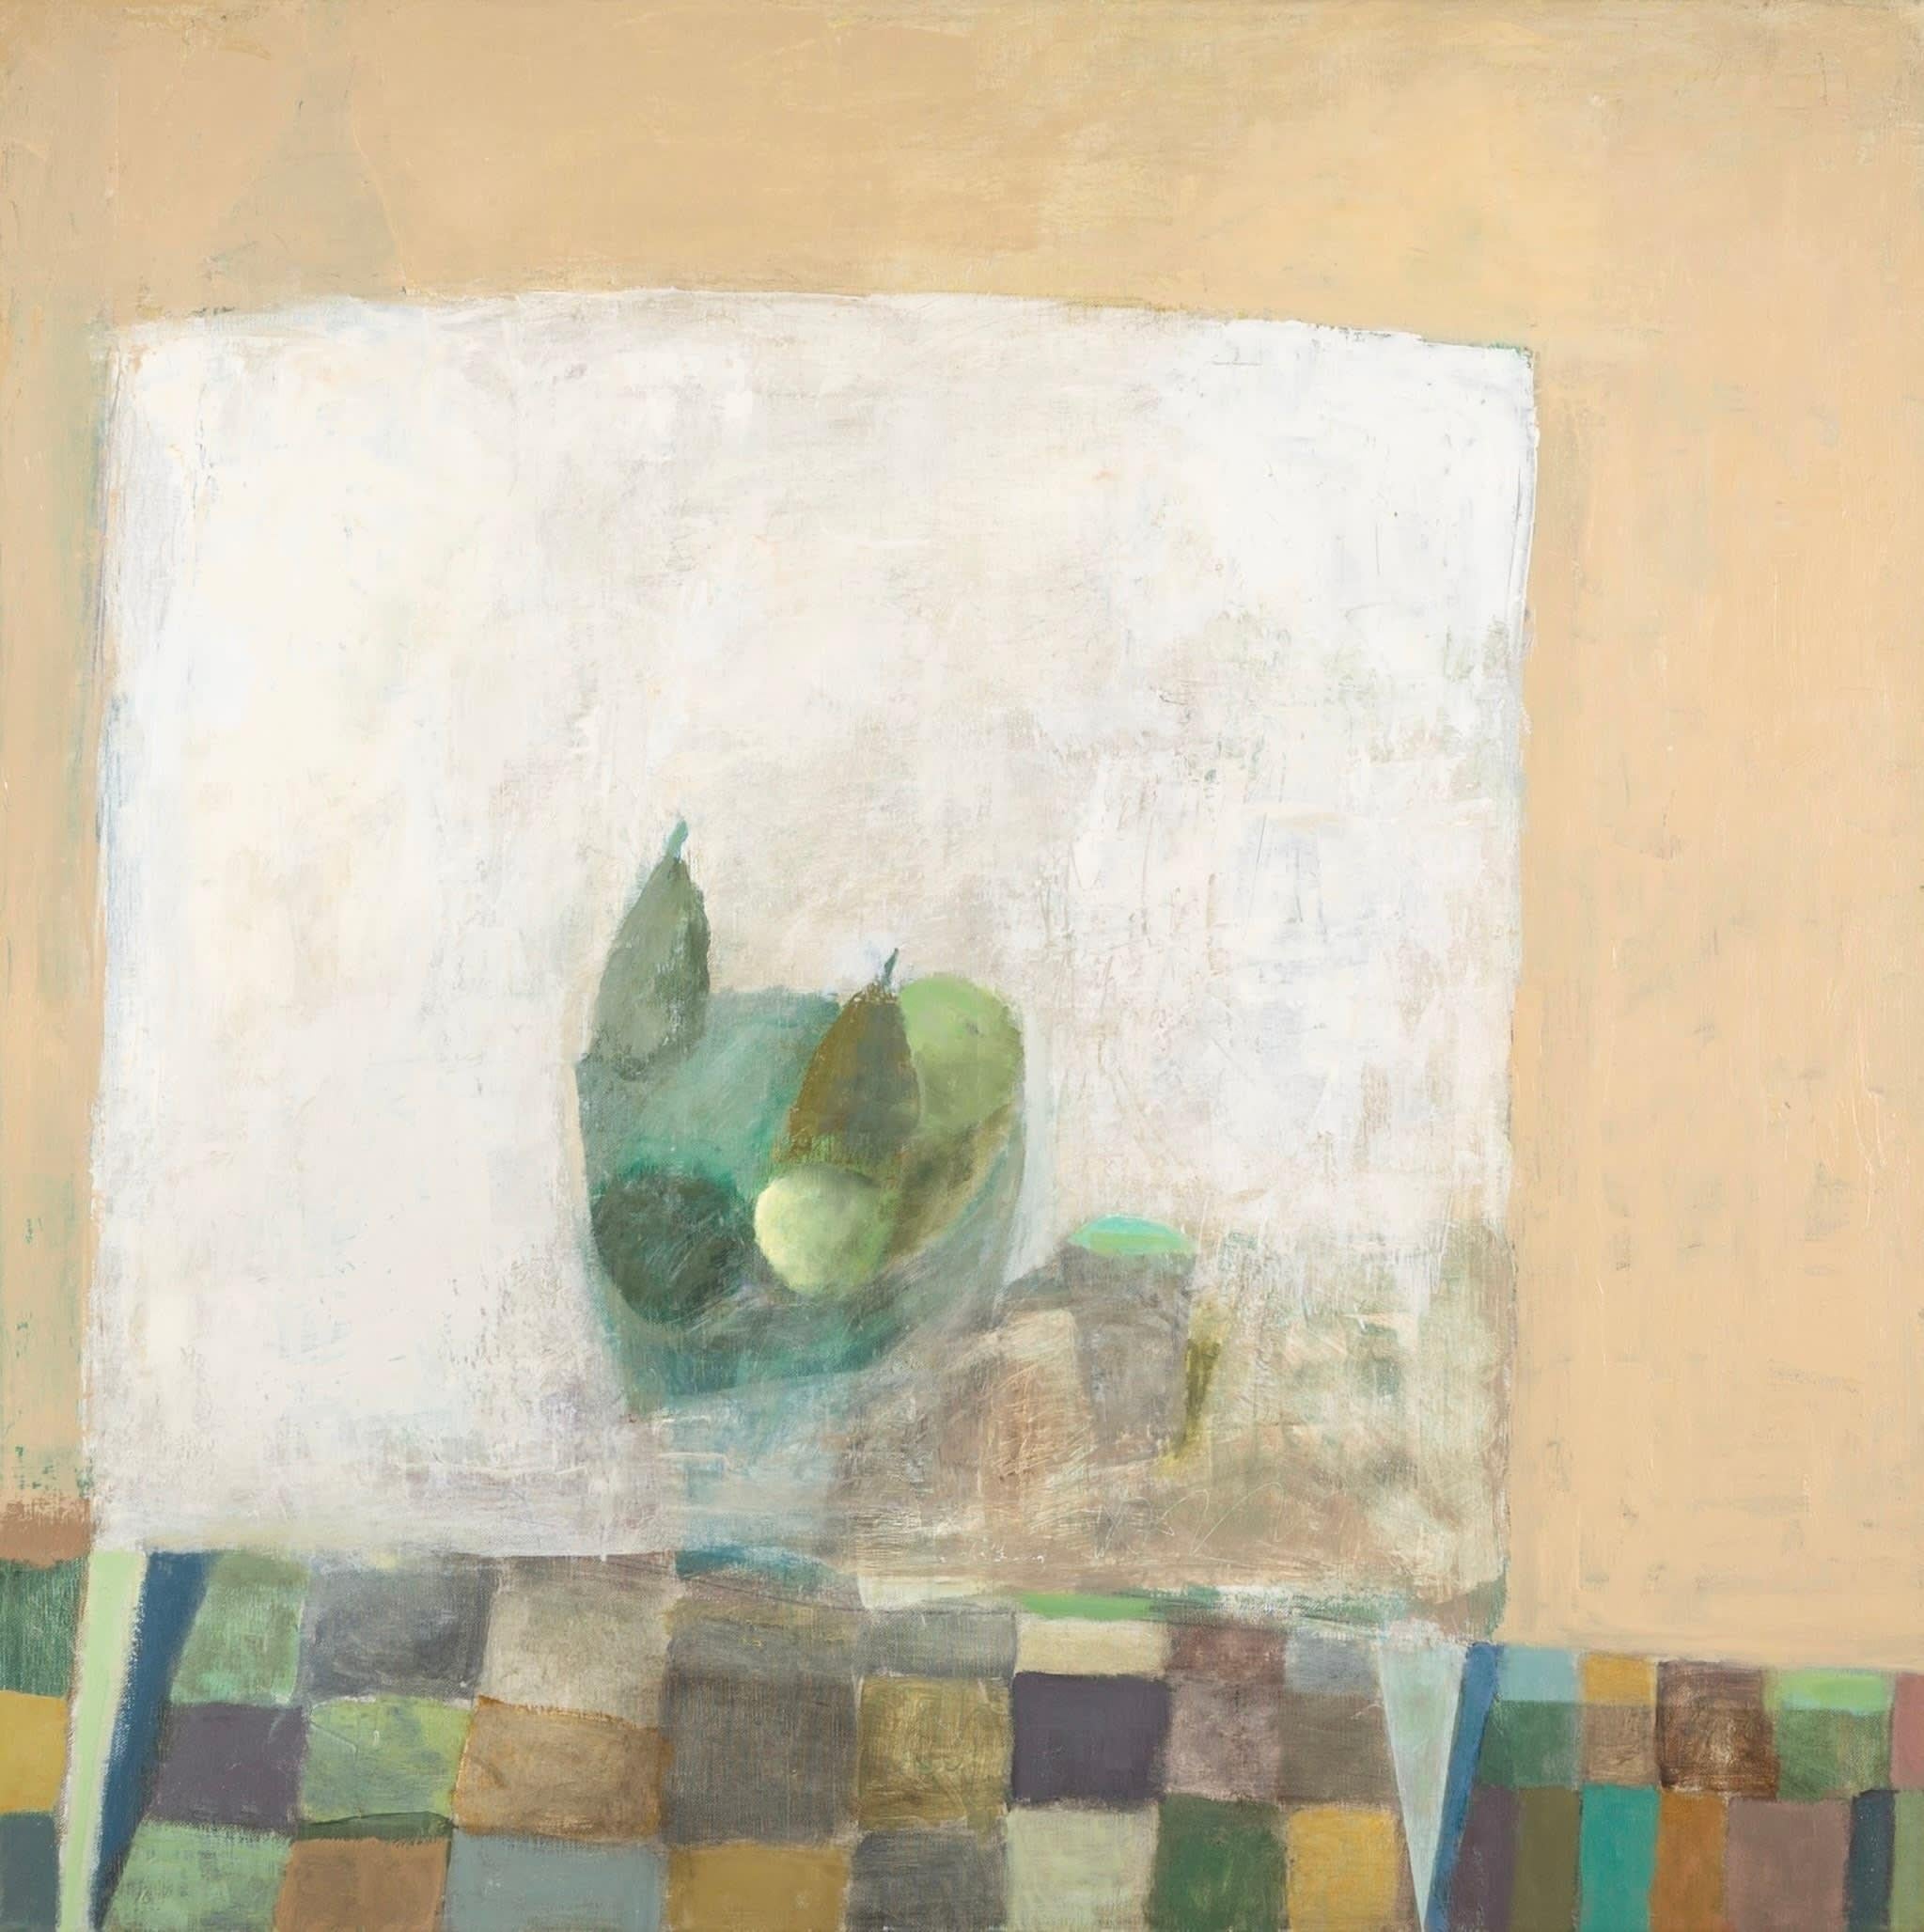 Whole Table, Oil on Canvas Painting by Nicholas Turner B. 1972, 2022/2023

Additional information:
Medium: Oil on canvas
Dimensions: 80 x 80 cm
31 1/2 x 31 1/2 in
Signed; titled and dated verso

Nicholas Turner is a painter of quiet compositions